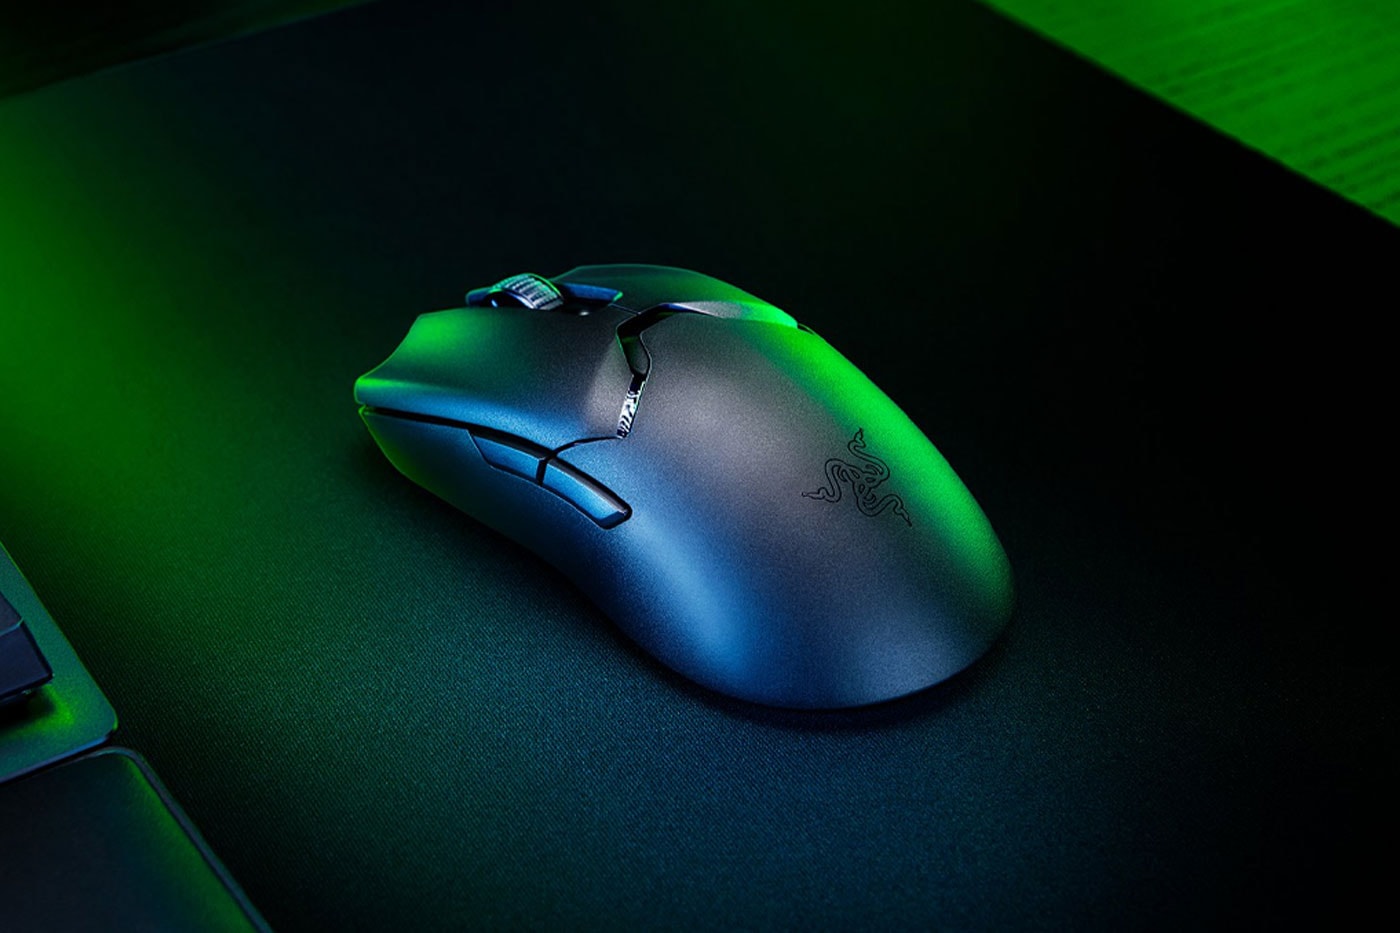 Razer Introduces the Viper V2 Pro Gaming Mouse